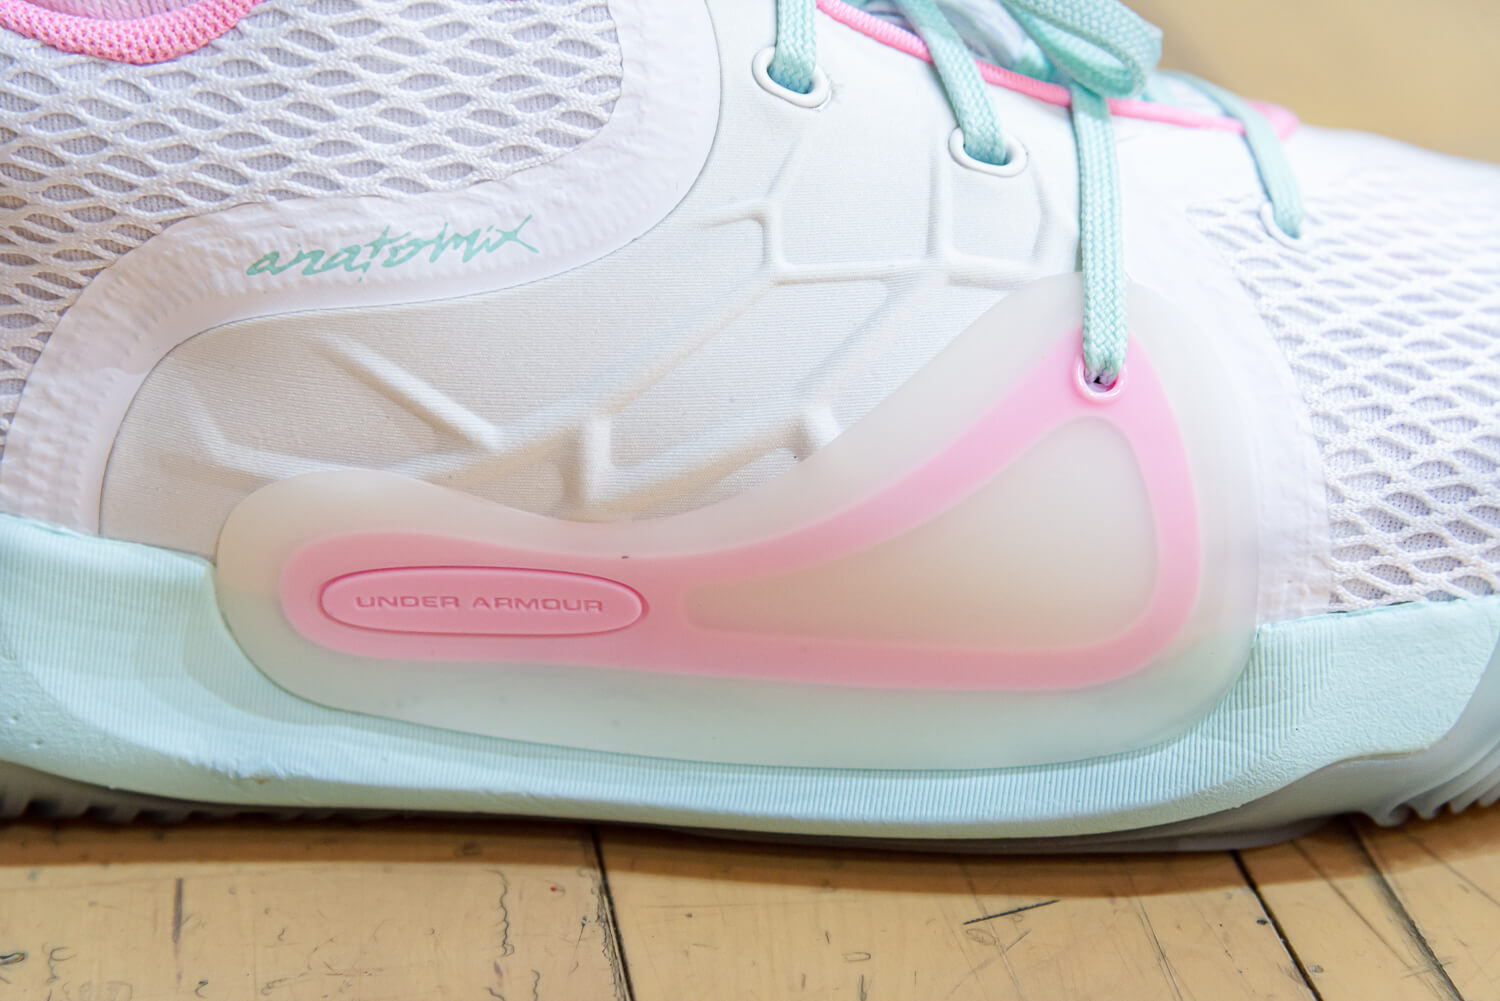 anatomix spawn review